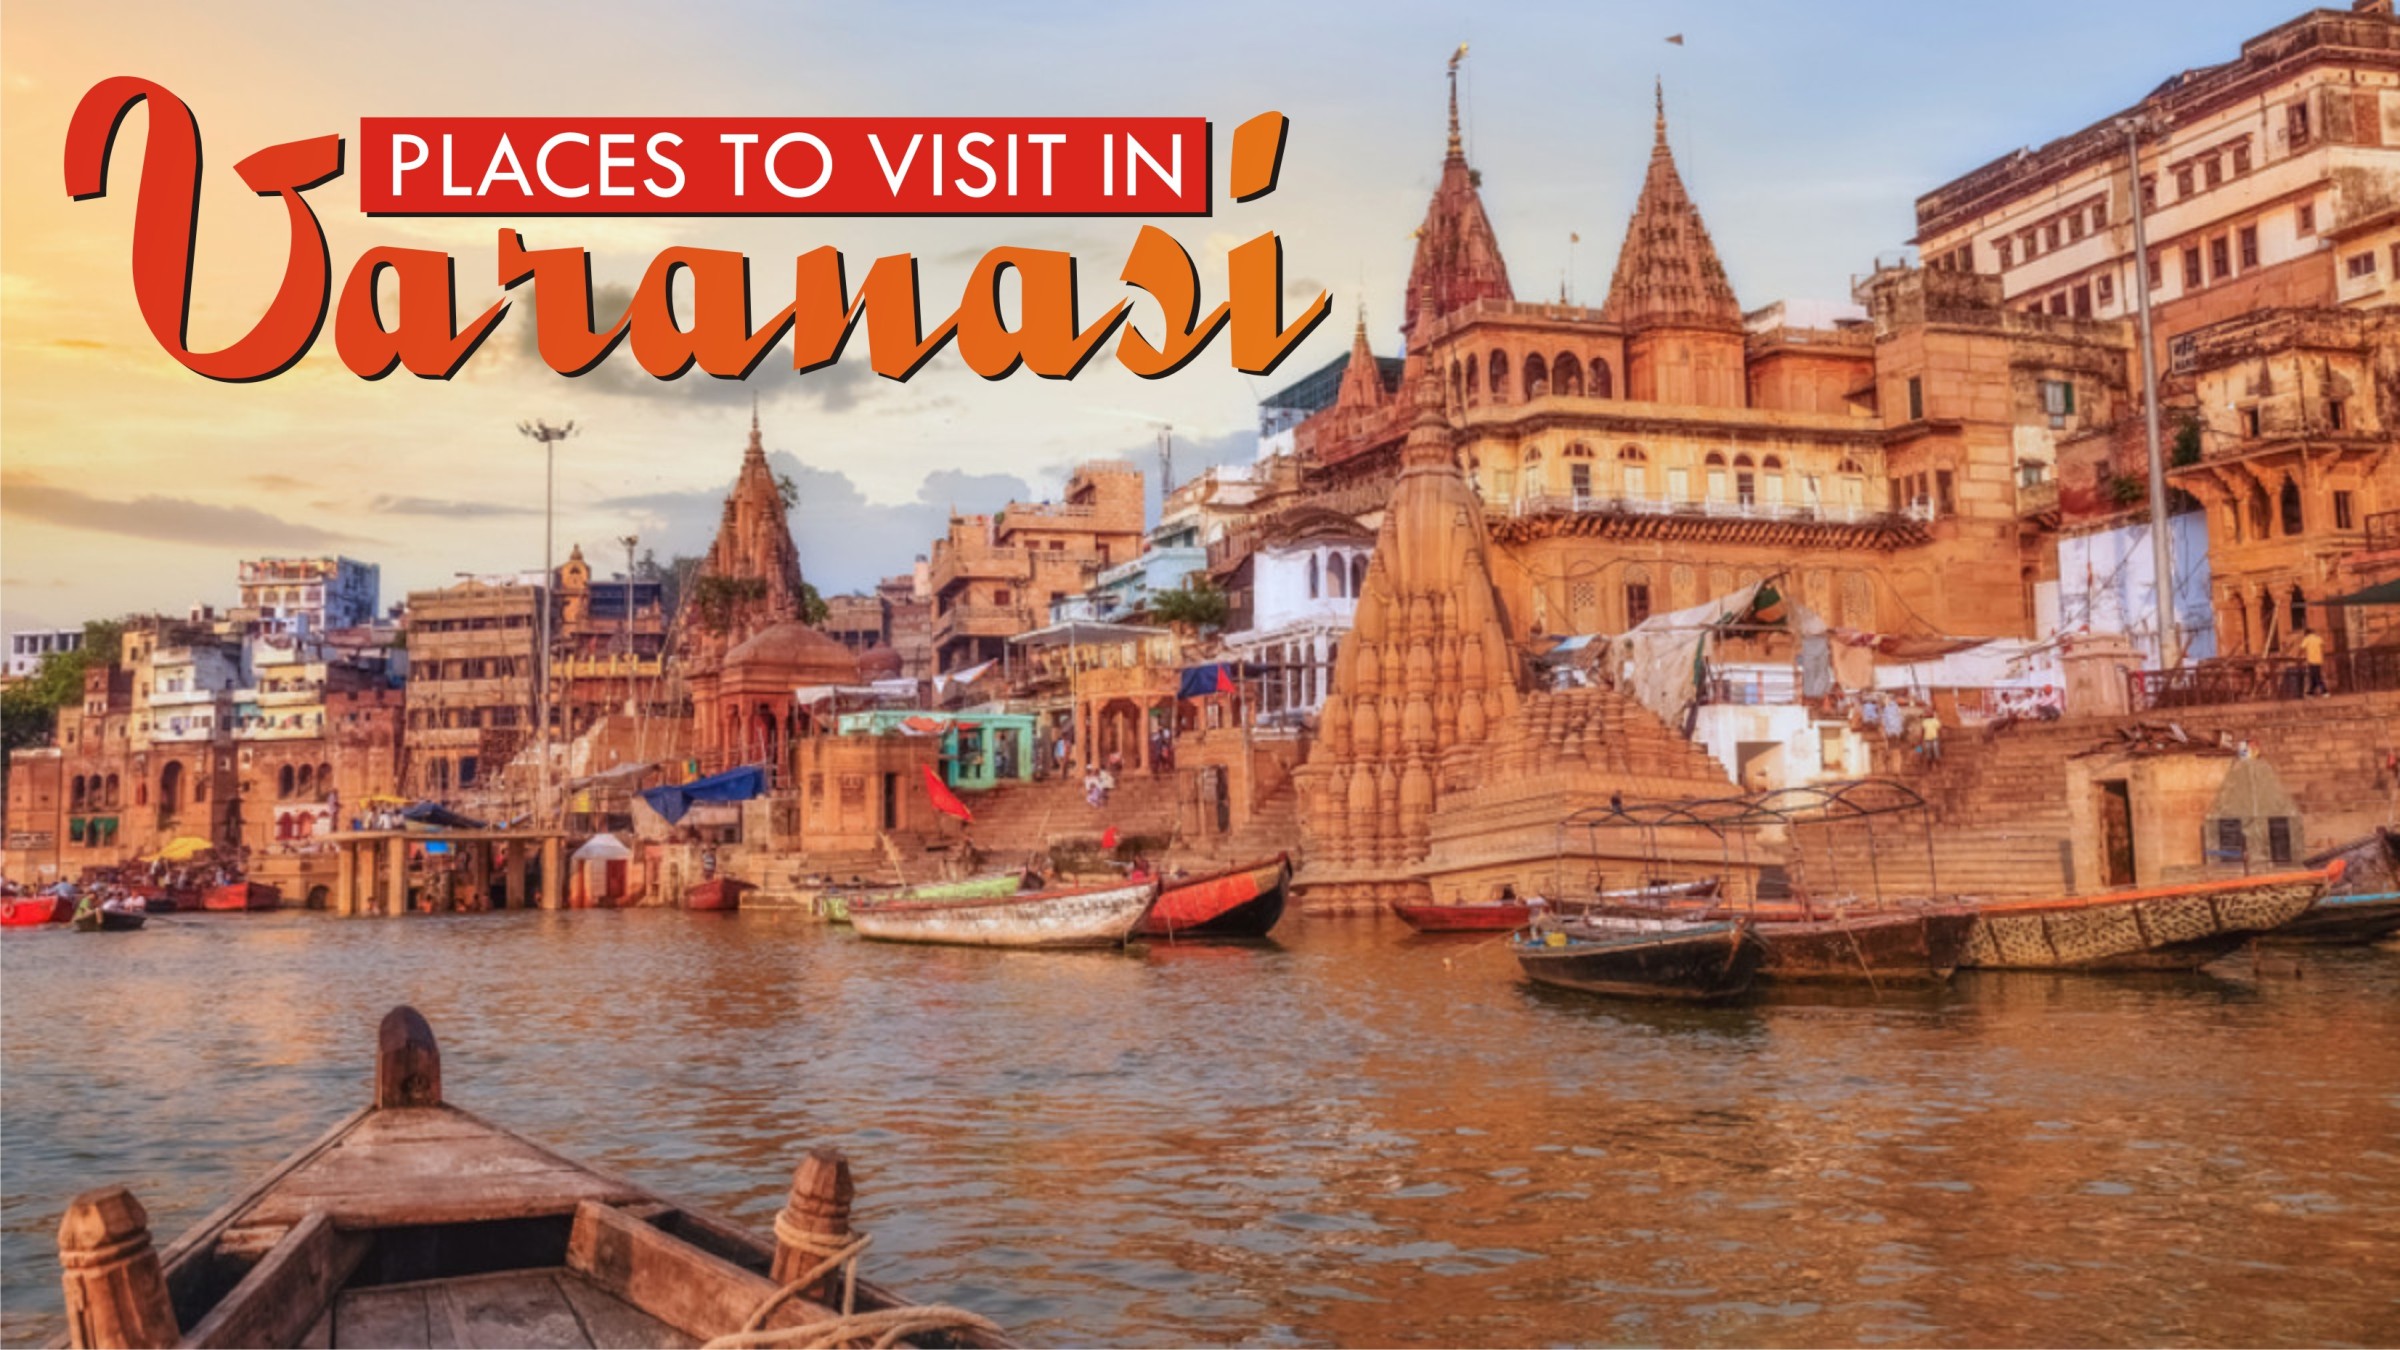 Famous temples to visit in Kashi